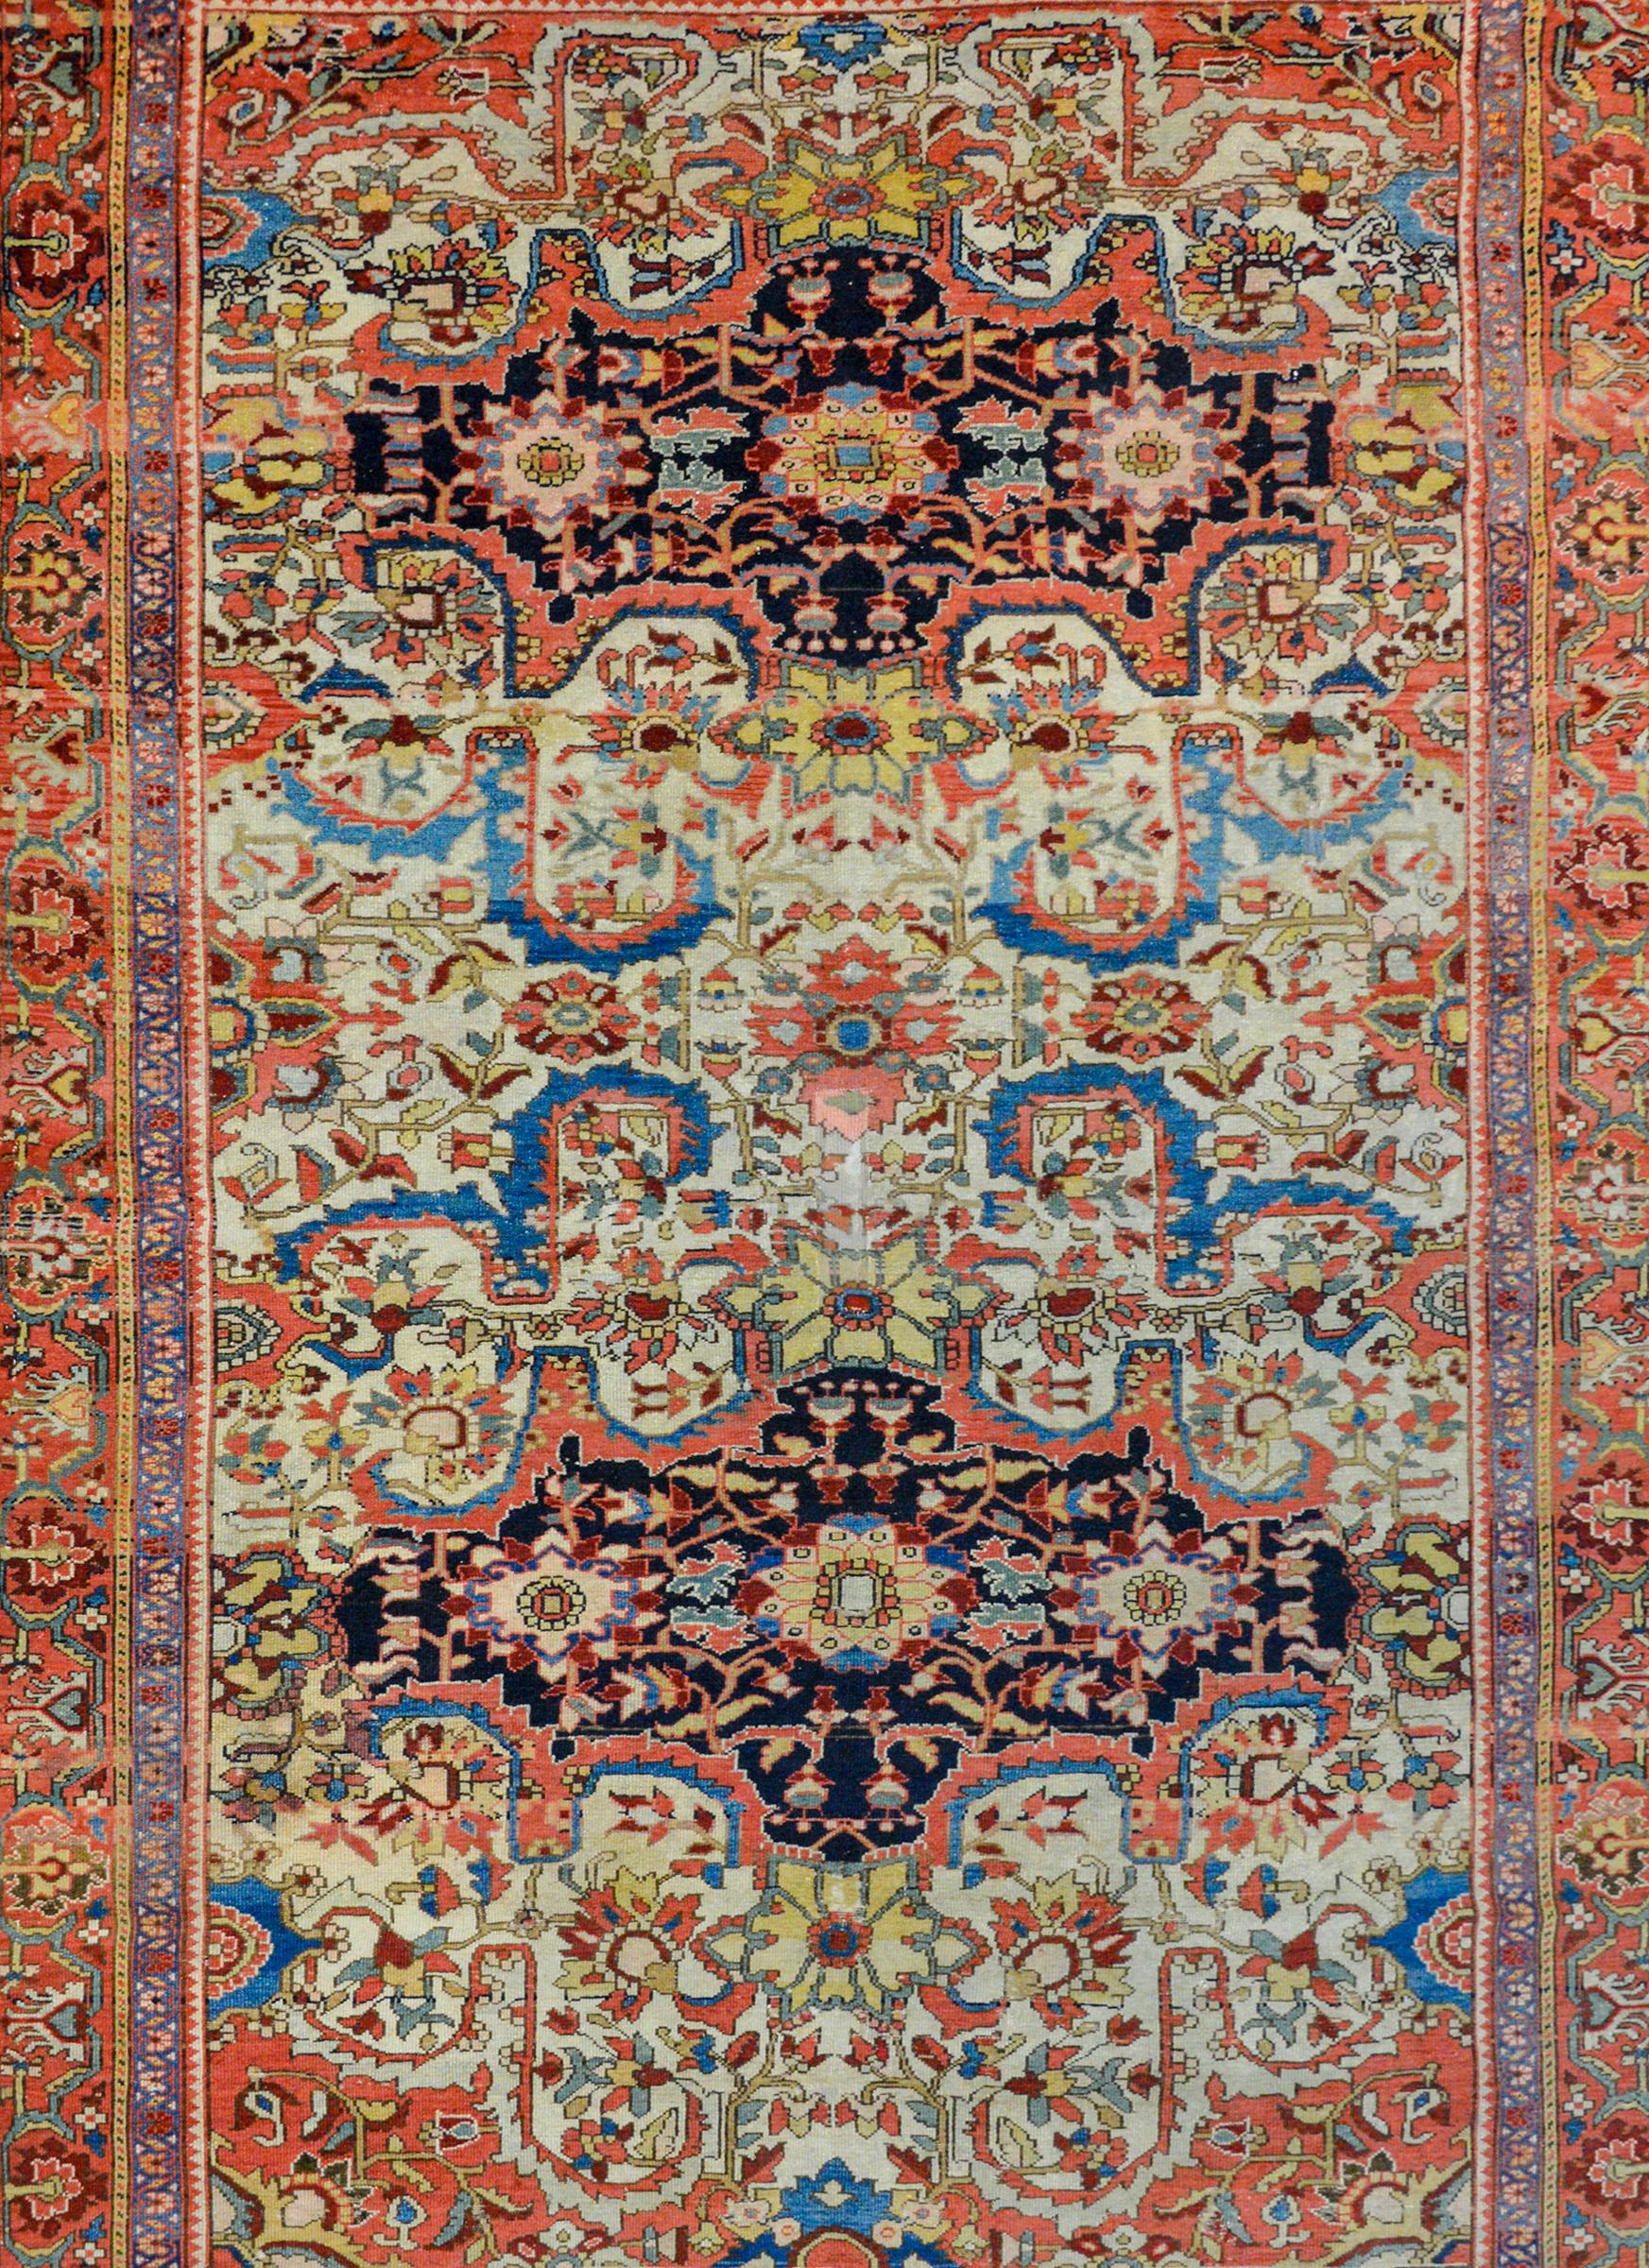 An incredible 19th century Persian Mission Malayer rug with a wonderful pattern containing two large floral medallions against a dark indigo background amidst an intensely woven field of more flowers and scrolling vines woven in myriad colors